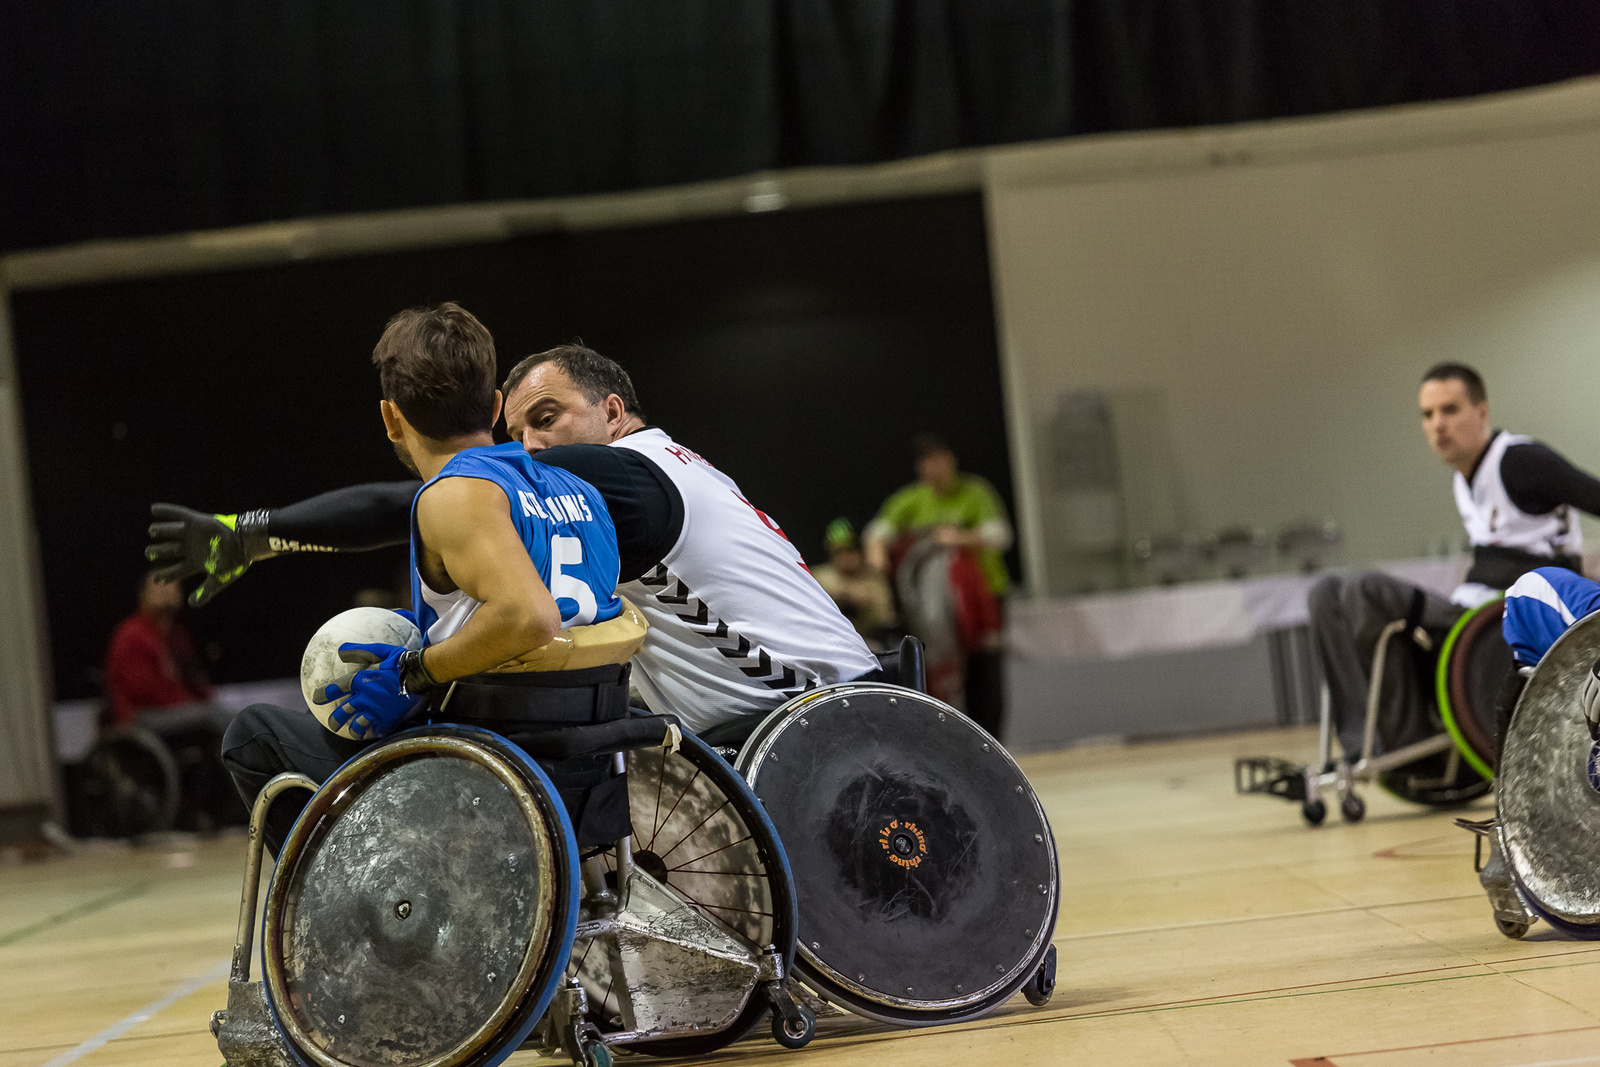 006 14 01 23 wheelchair rugby